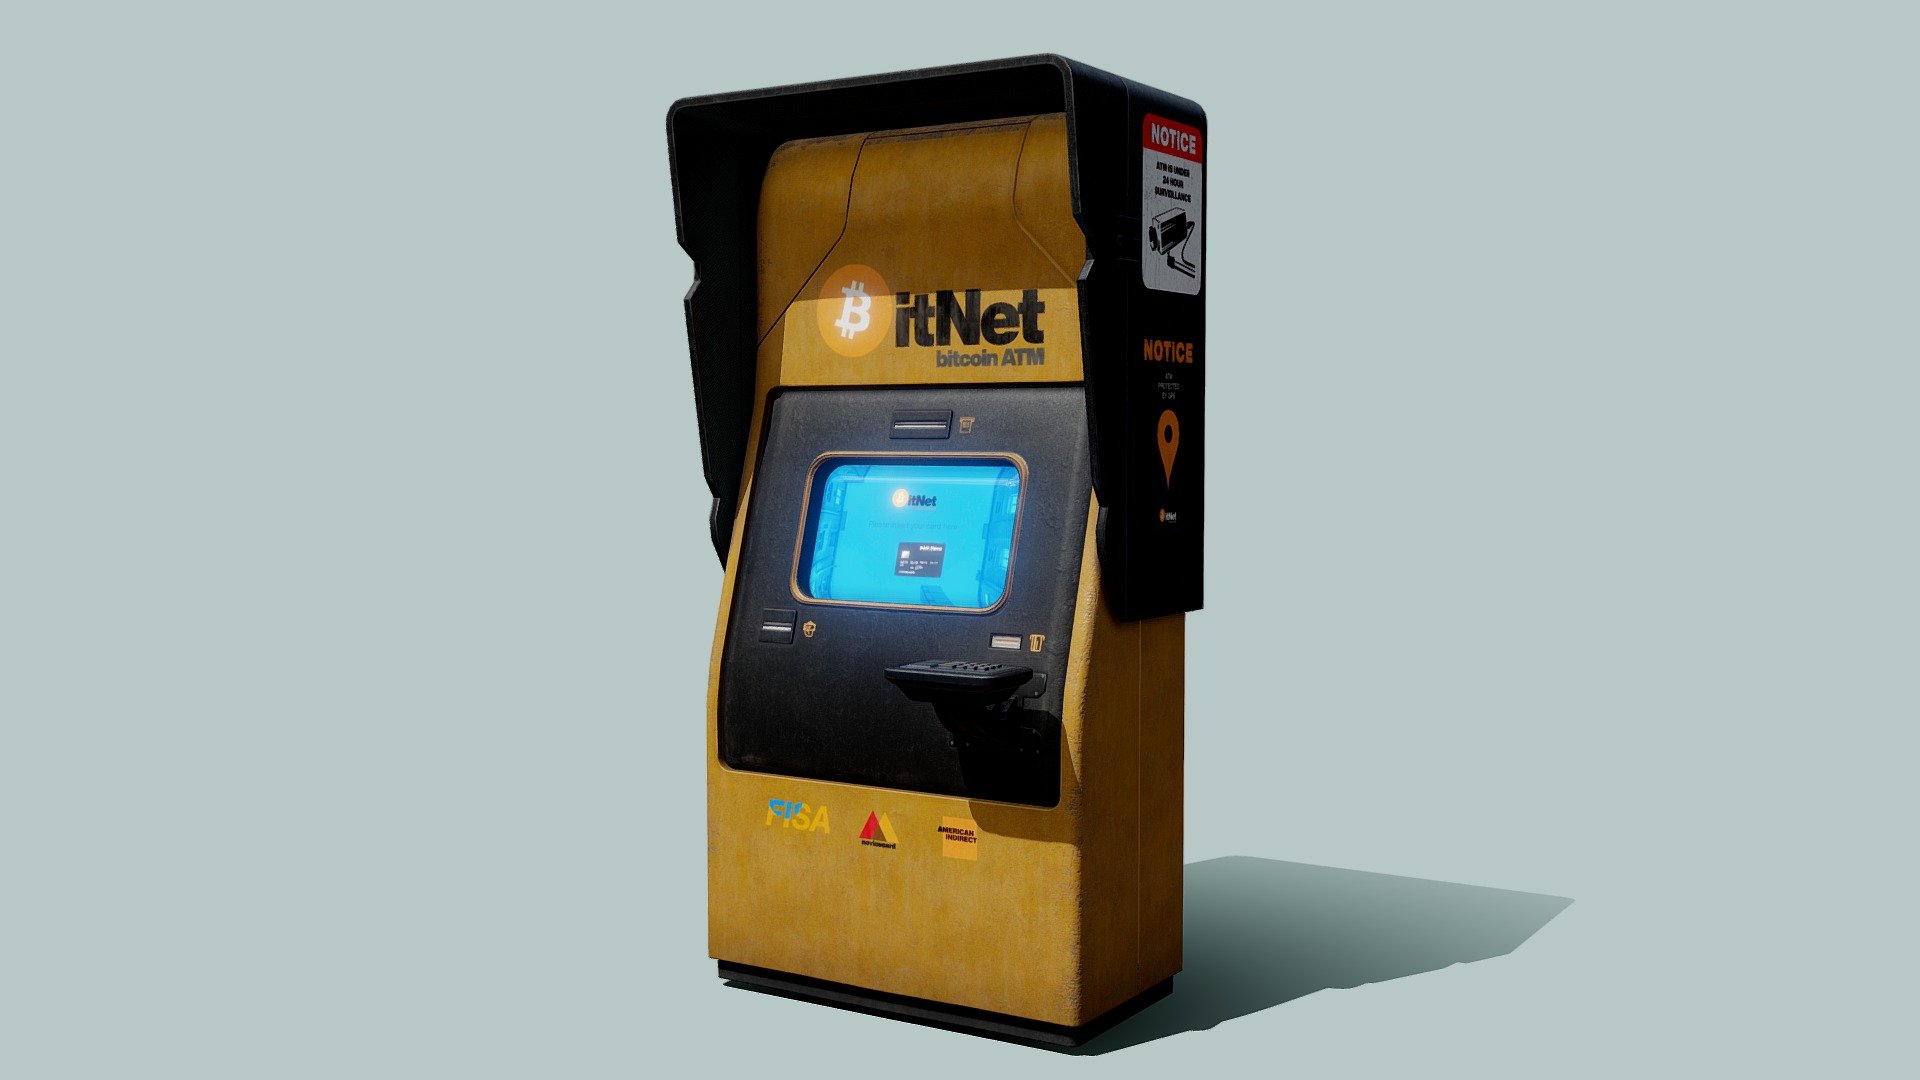 3D ATM low poly model
4K PBR Textures.

8603 Tris 
4118 Polygons

You can also replace the screen texture with an animated version.
Animated Textures:
https://drive.google.com/drive/folders/1qltThfxrhcYfWV4cBHPPmlxHC8N6FEKr?usp=sharing - ATM Slightly Damaged Version - 3D model by vertexmonster 3d model